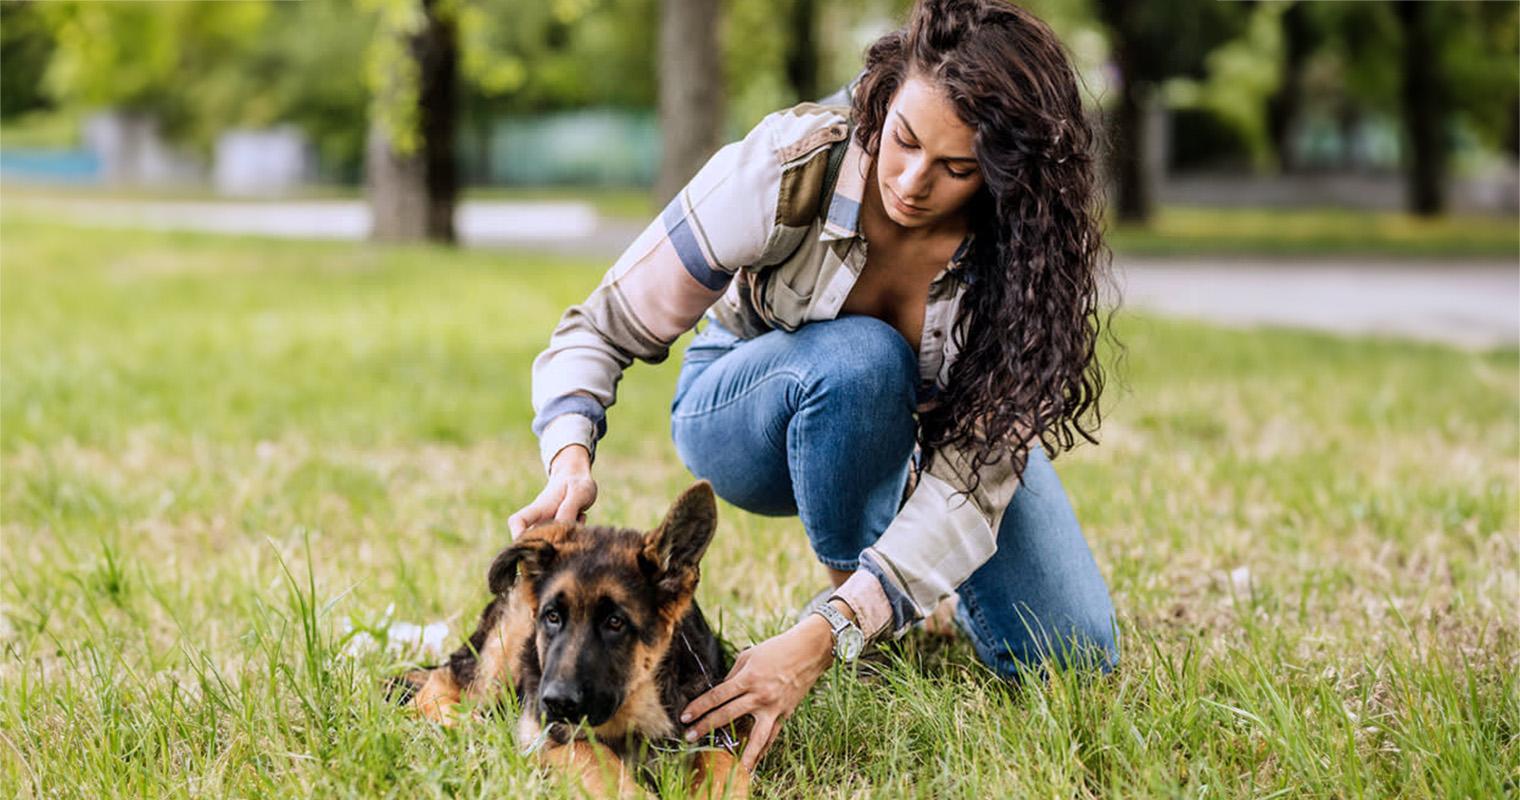 Stray Pets: What to do if You Find a Stray Pet